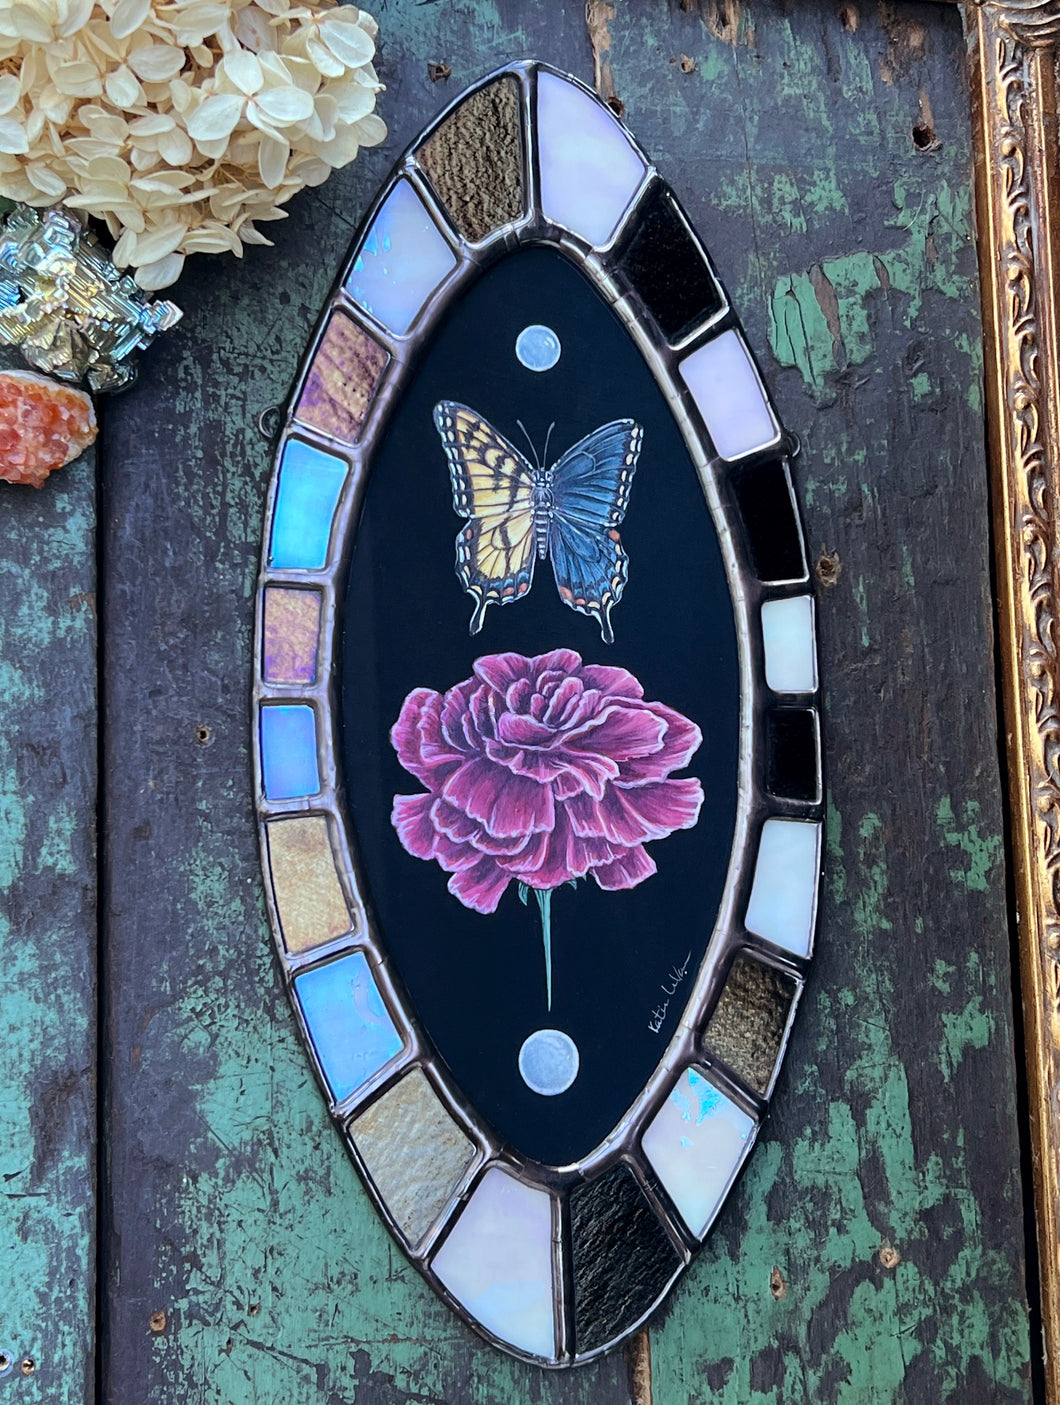 Full photo- bilateral gynandromorph swallowtail with pink carnations gouache painting, black background, encased in glass with bronze/black and white/opal checkered border. Oval shape.